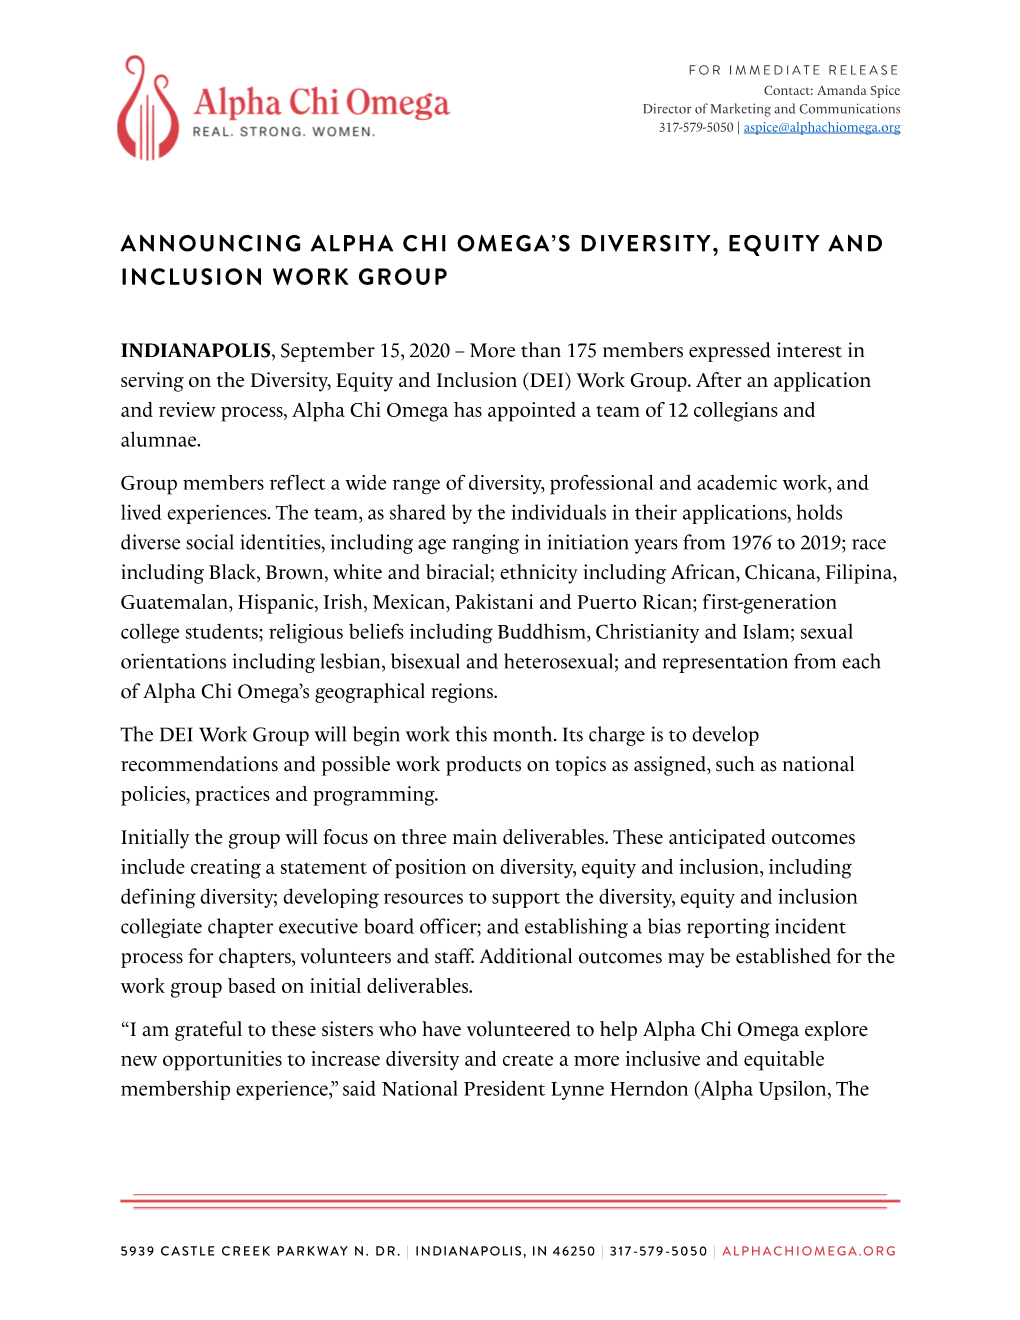 Announcing Alpha Chi Omega's Diversity, Equity And